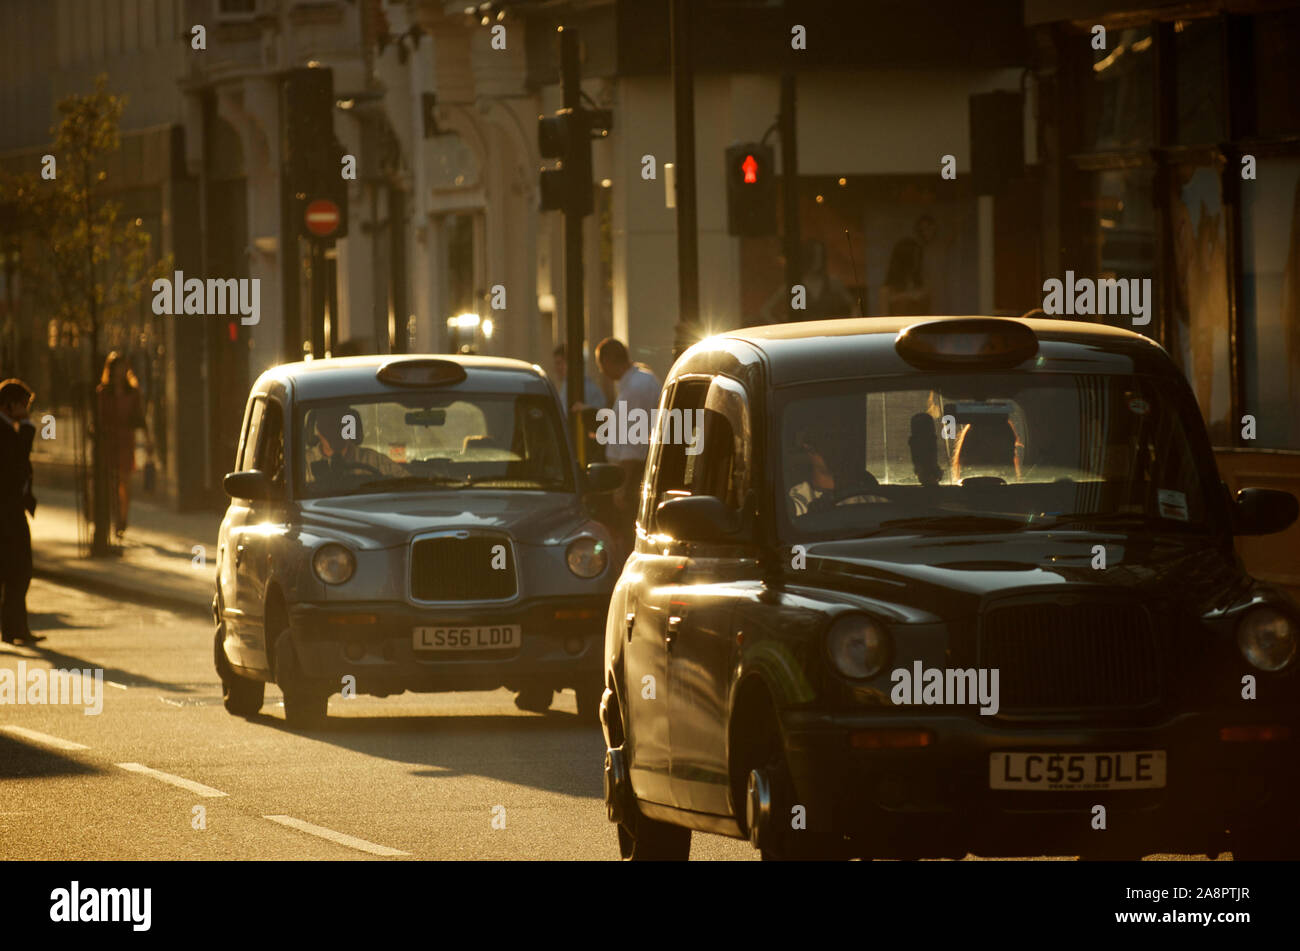 LONDON - SEPTEMBER 30, 2011: A pair of black taxis, also known as Hackney Carriages, drive in afternoon sun. Stock Photo